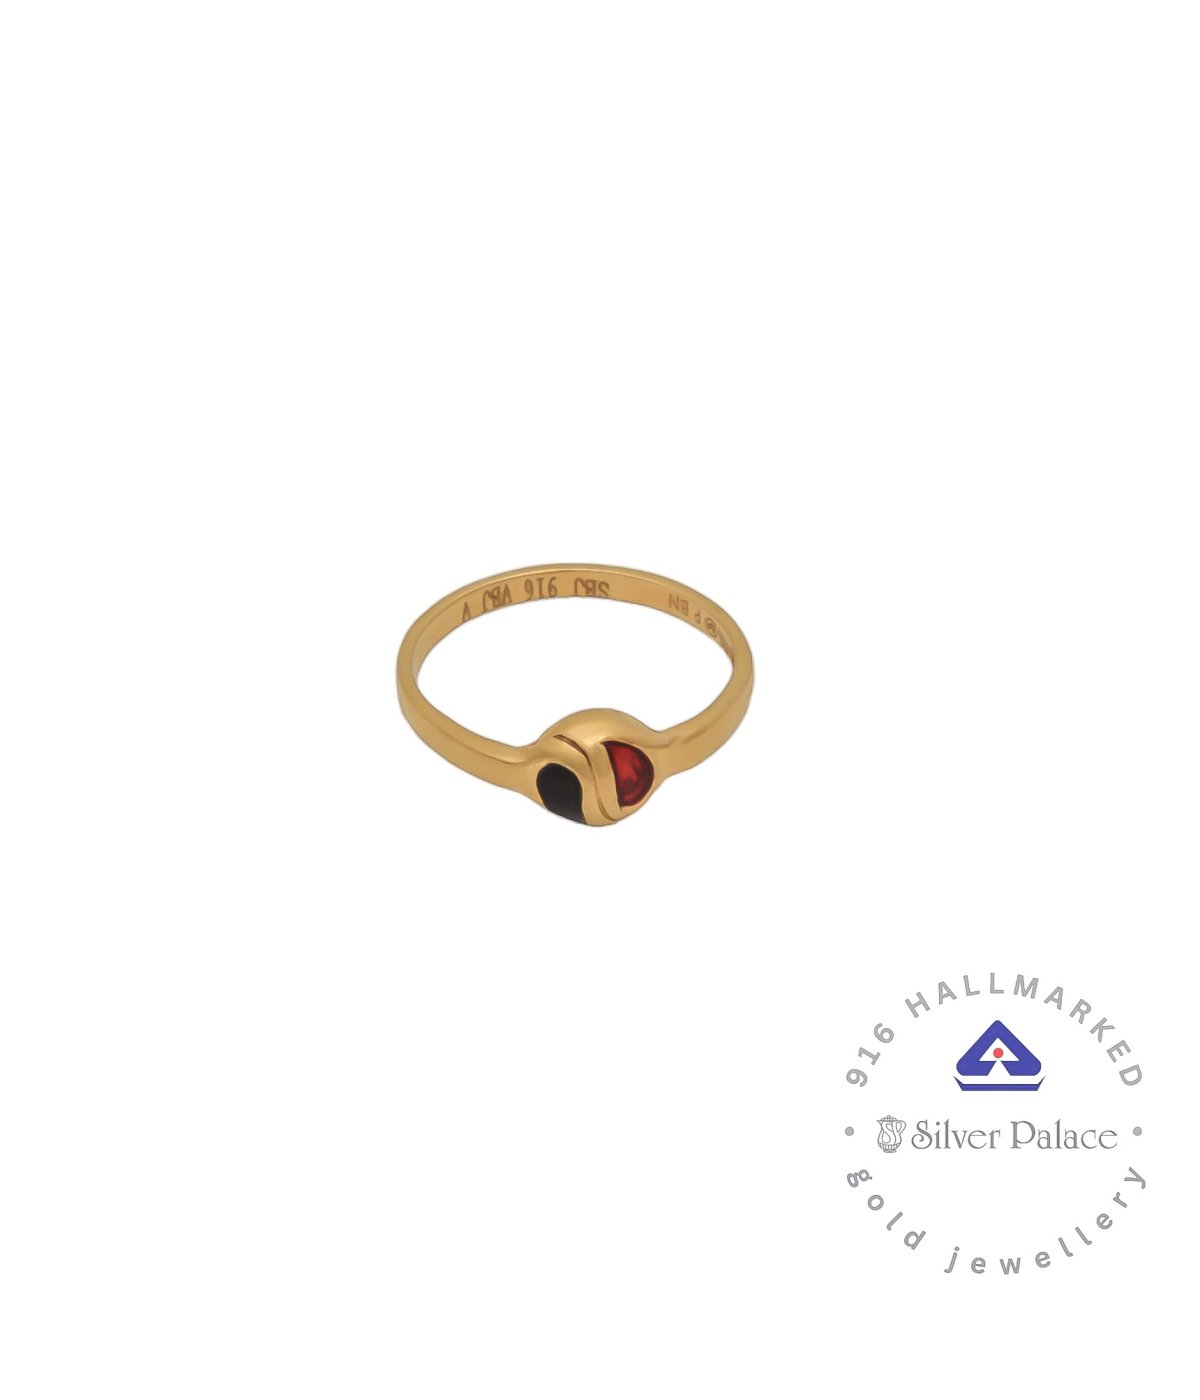 Kanche Collections New Design With Enamel Finish 916 Gold Ring For New Bory Baby's